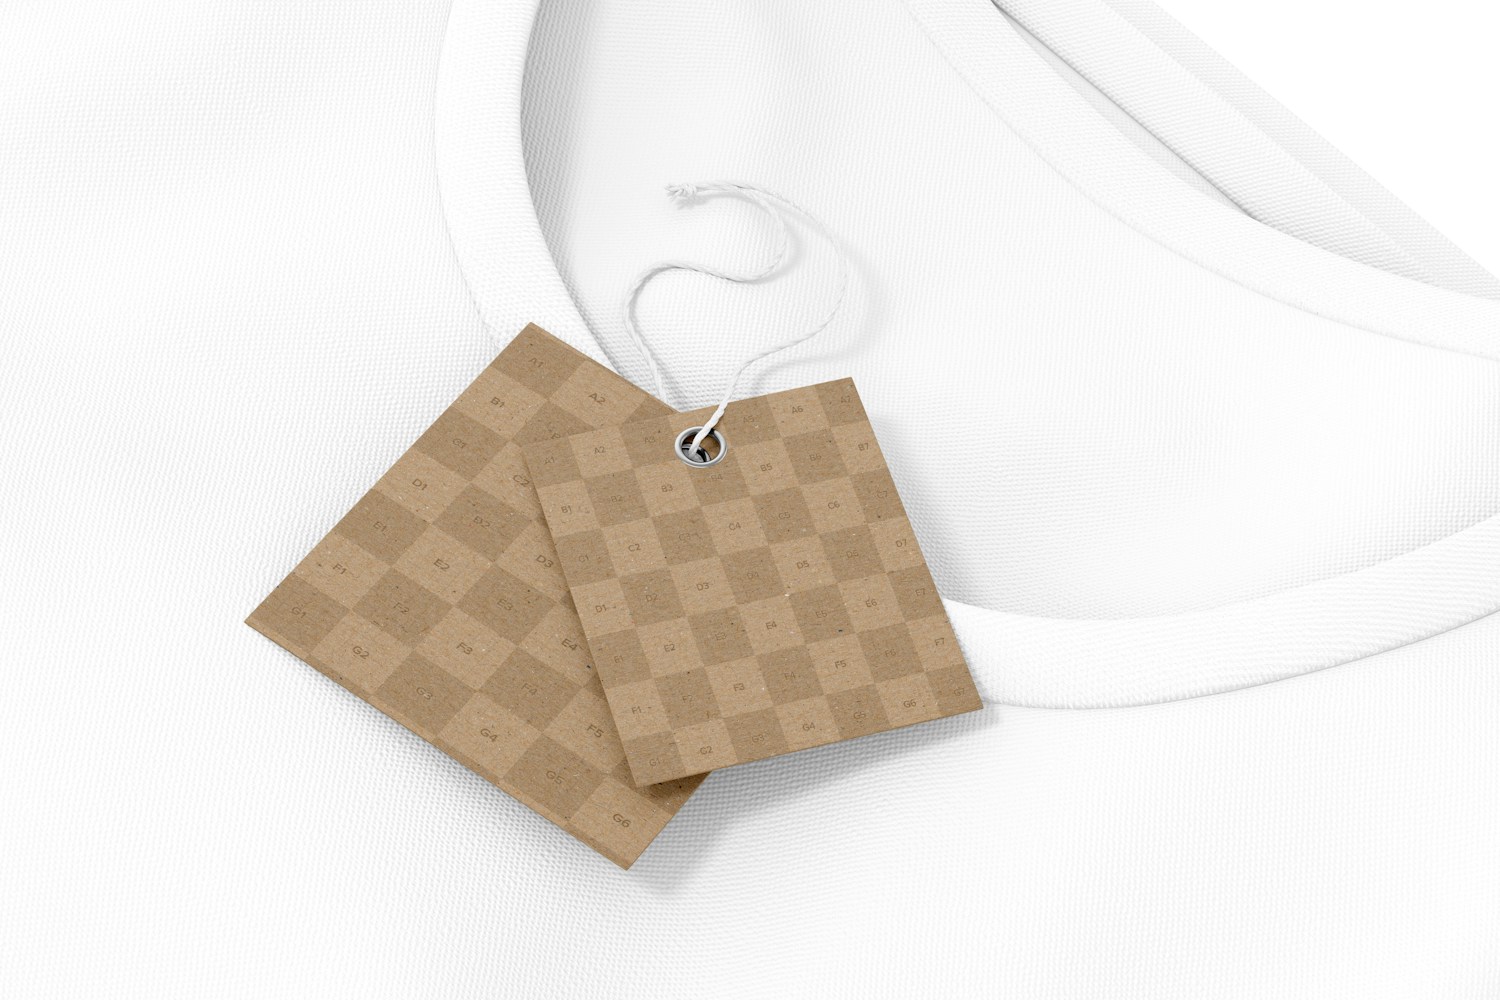 Square Cardboard Tags Set with a T-Shirt Mockup